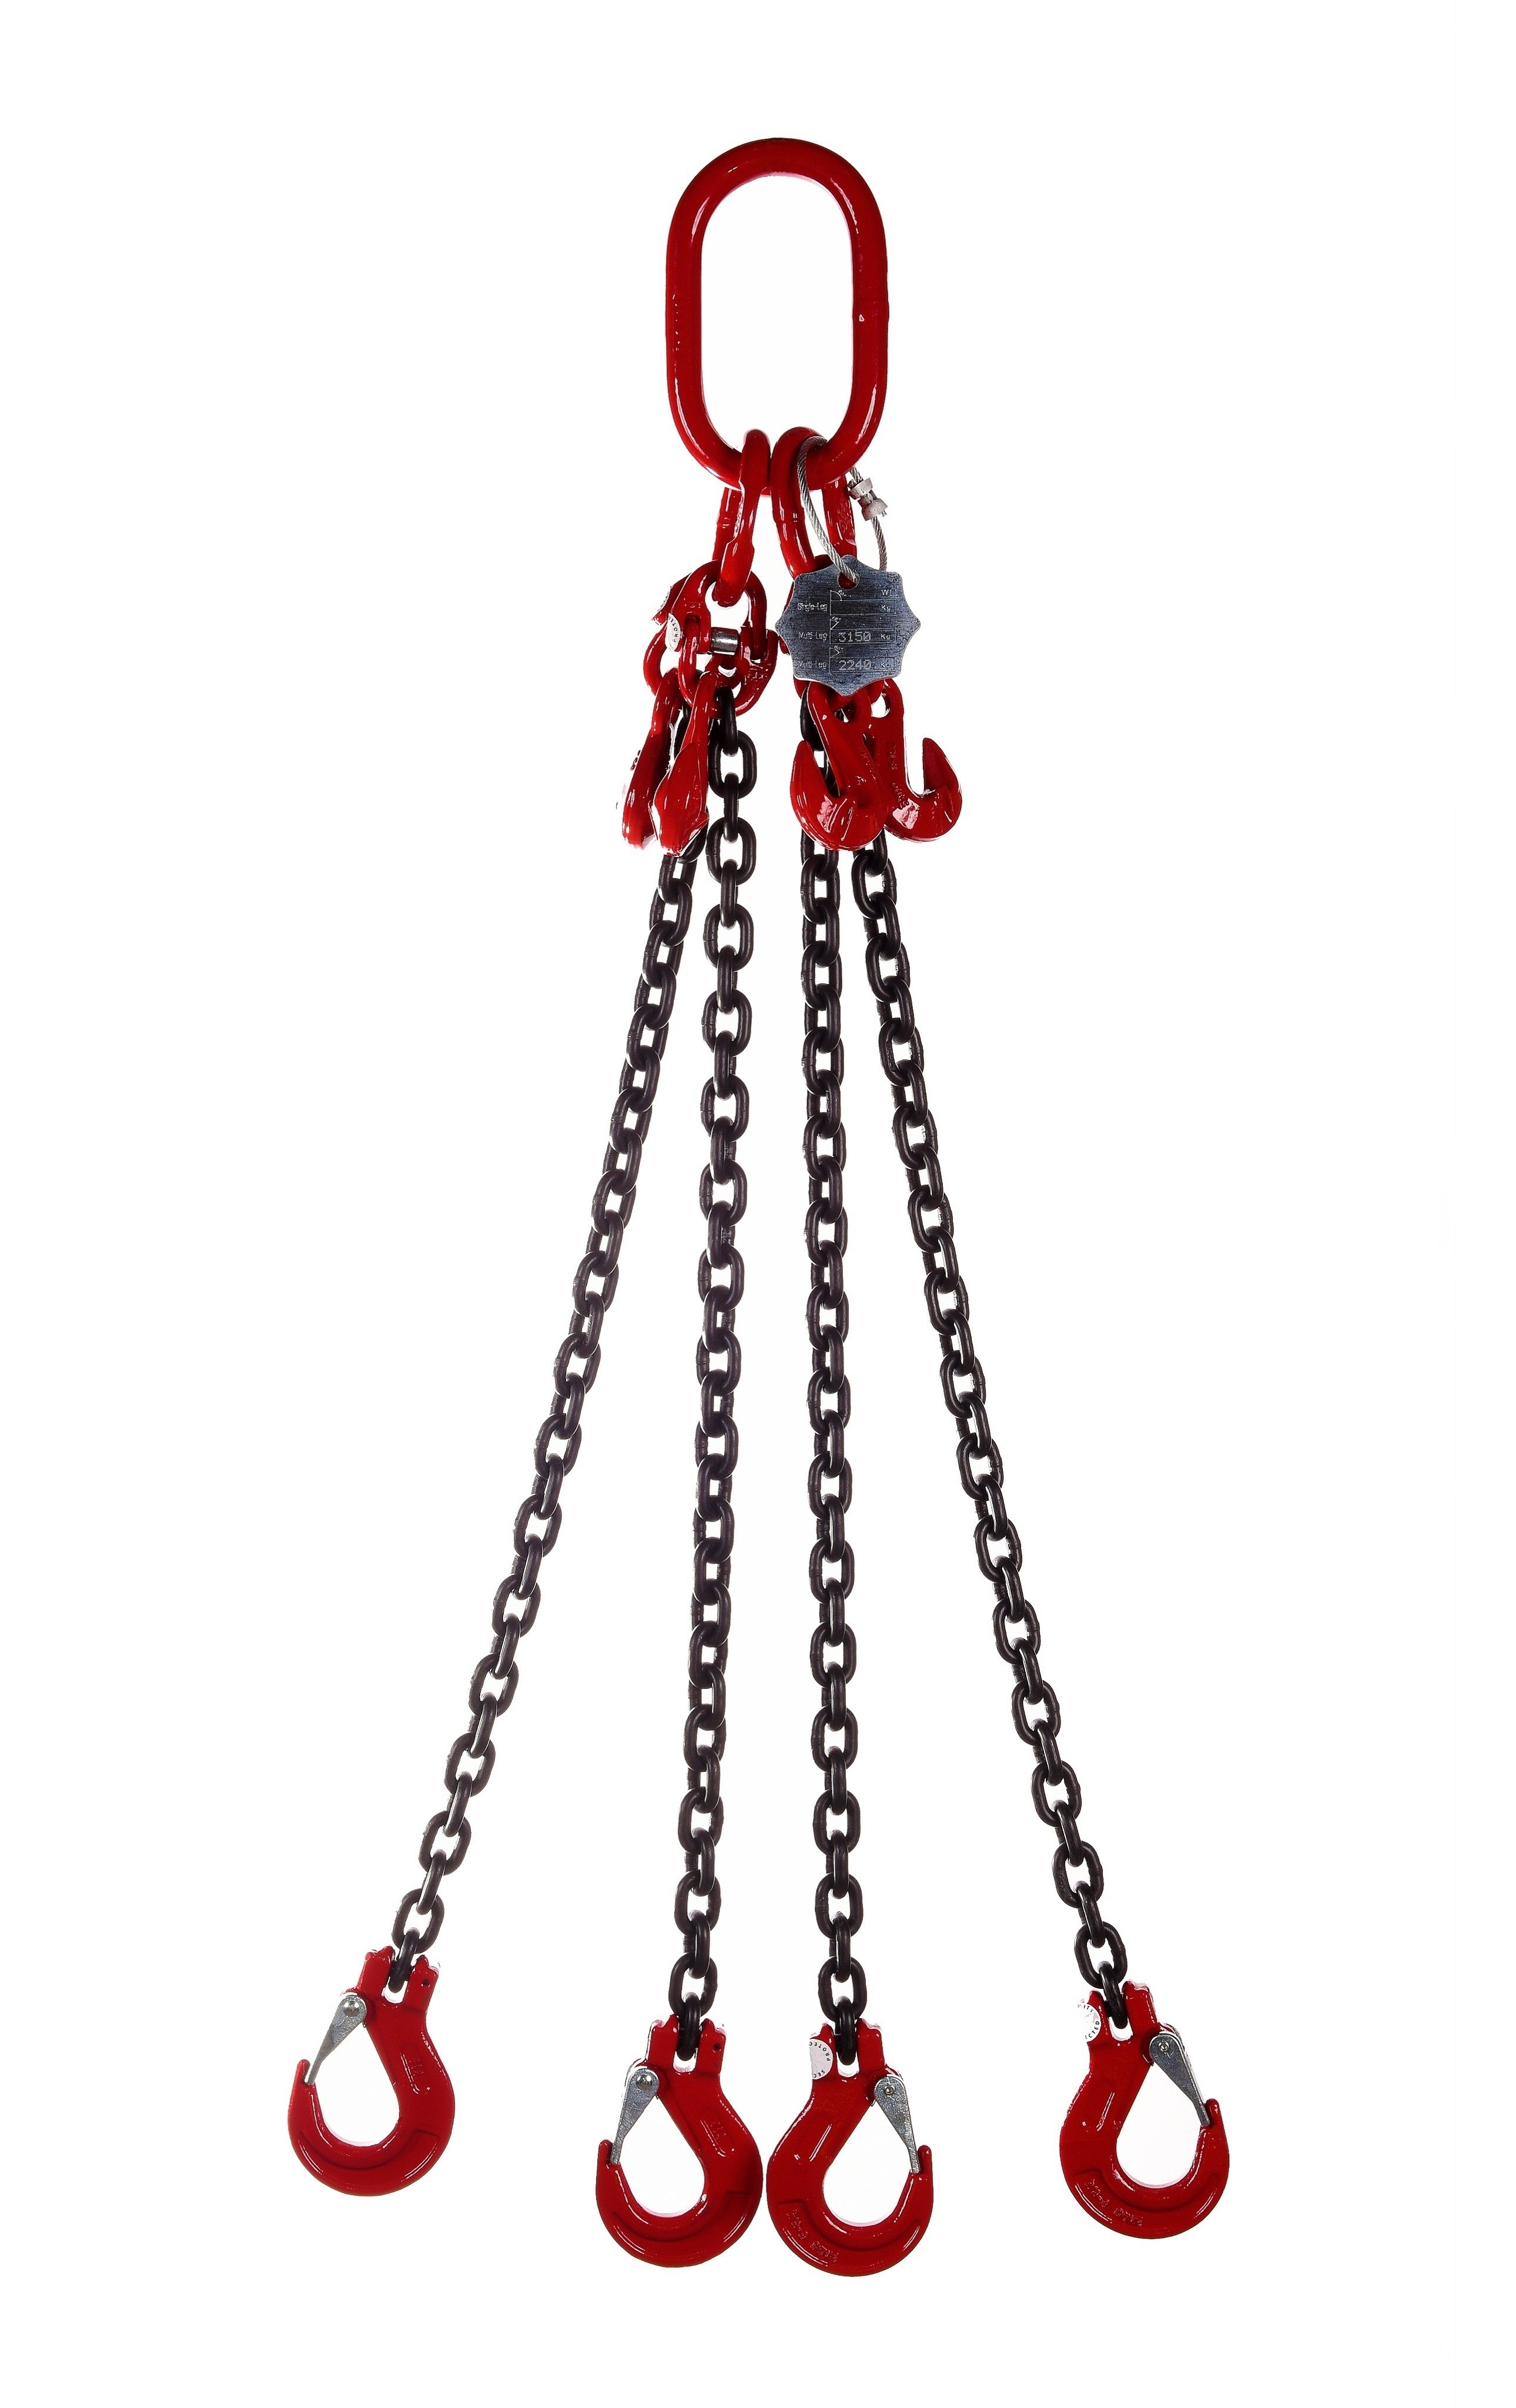 4 Leg 17.0tonne 16mm Lifting Chain Sling with choice of length and hooks – Without Shortening Hook – 5mtr – Clevis Sling Hook – Chain Slings – WSB